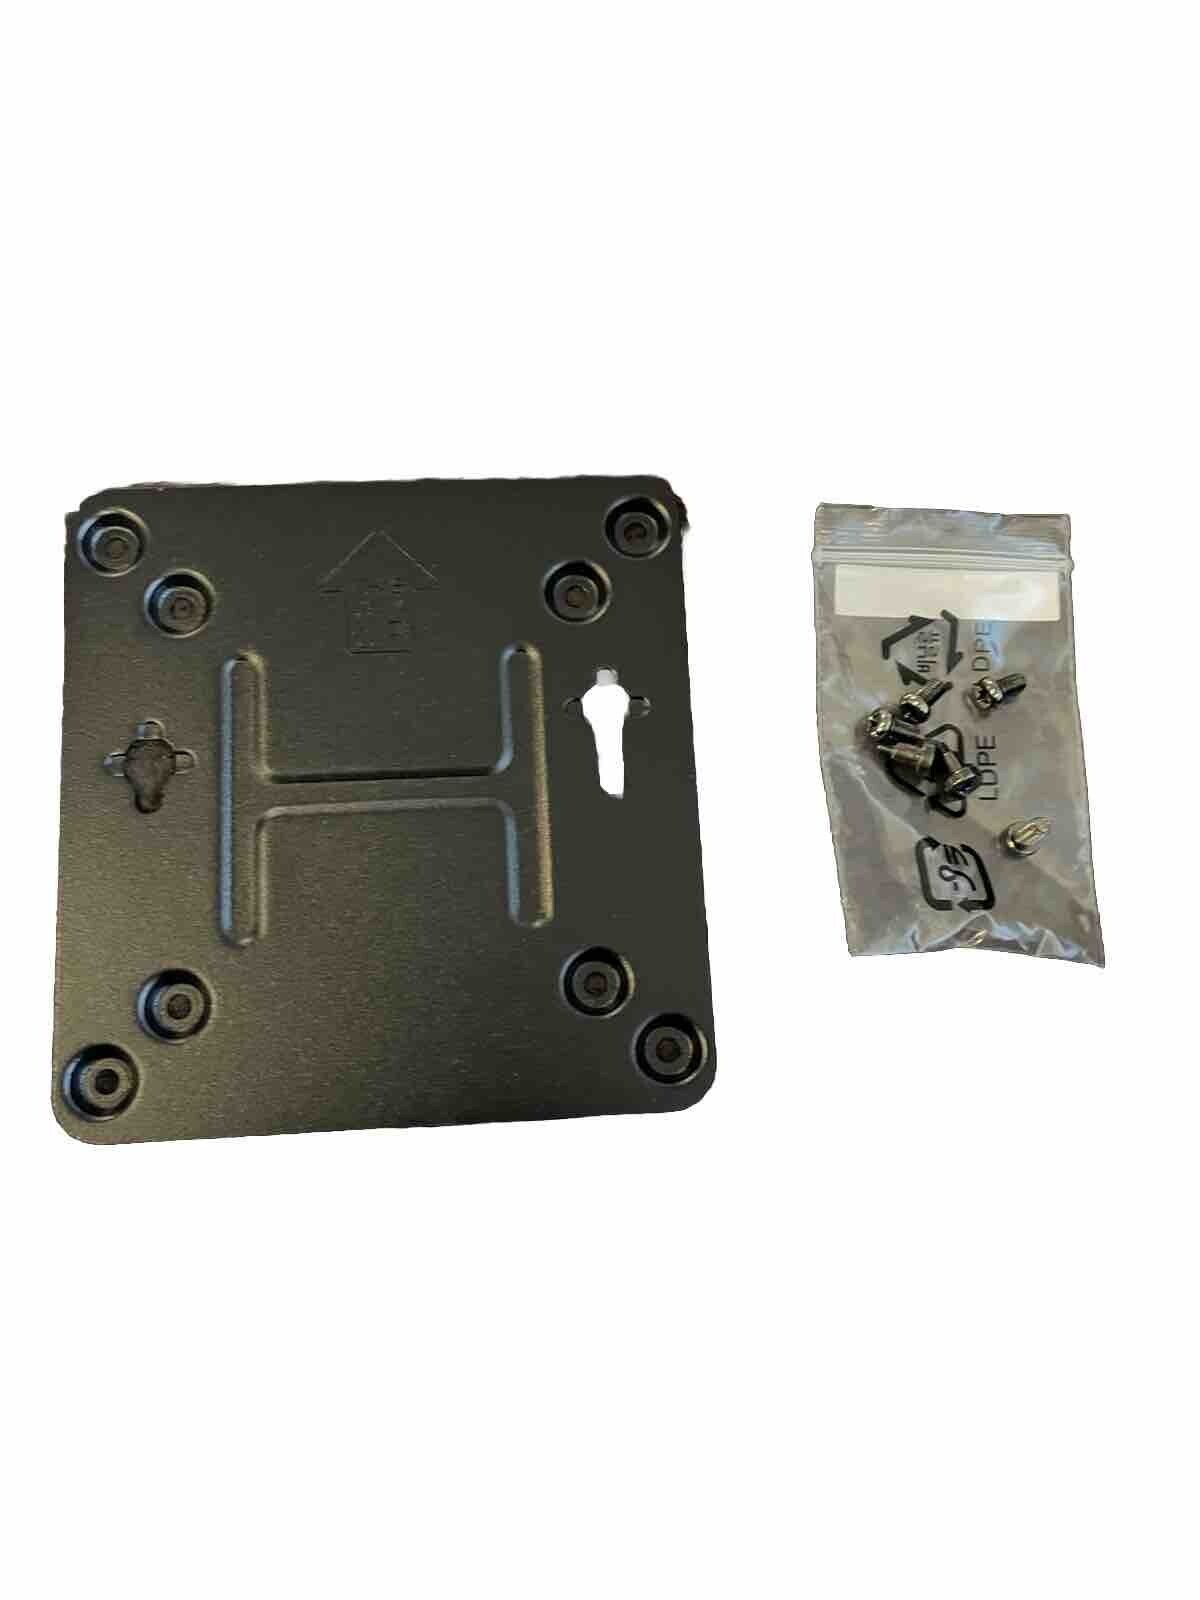 New For Intel NUC Vesa Mount Bracket Mounting Plate with Screws USA Shipping